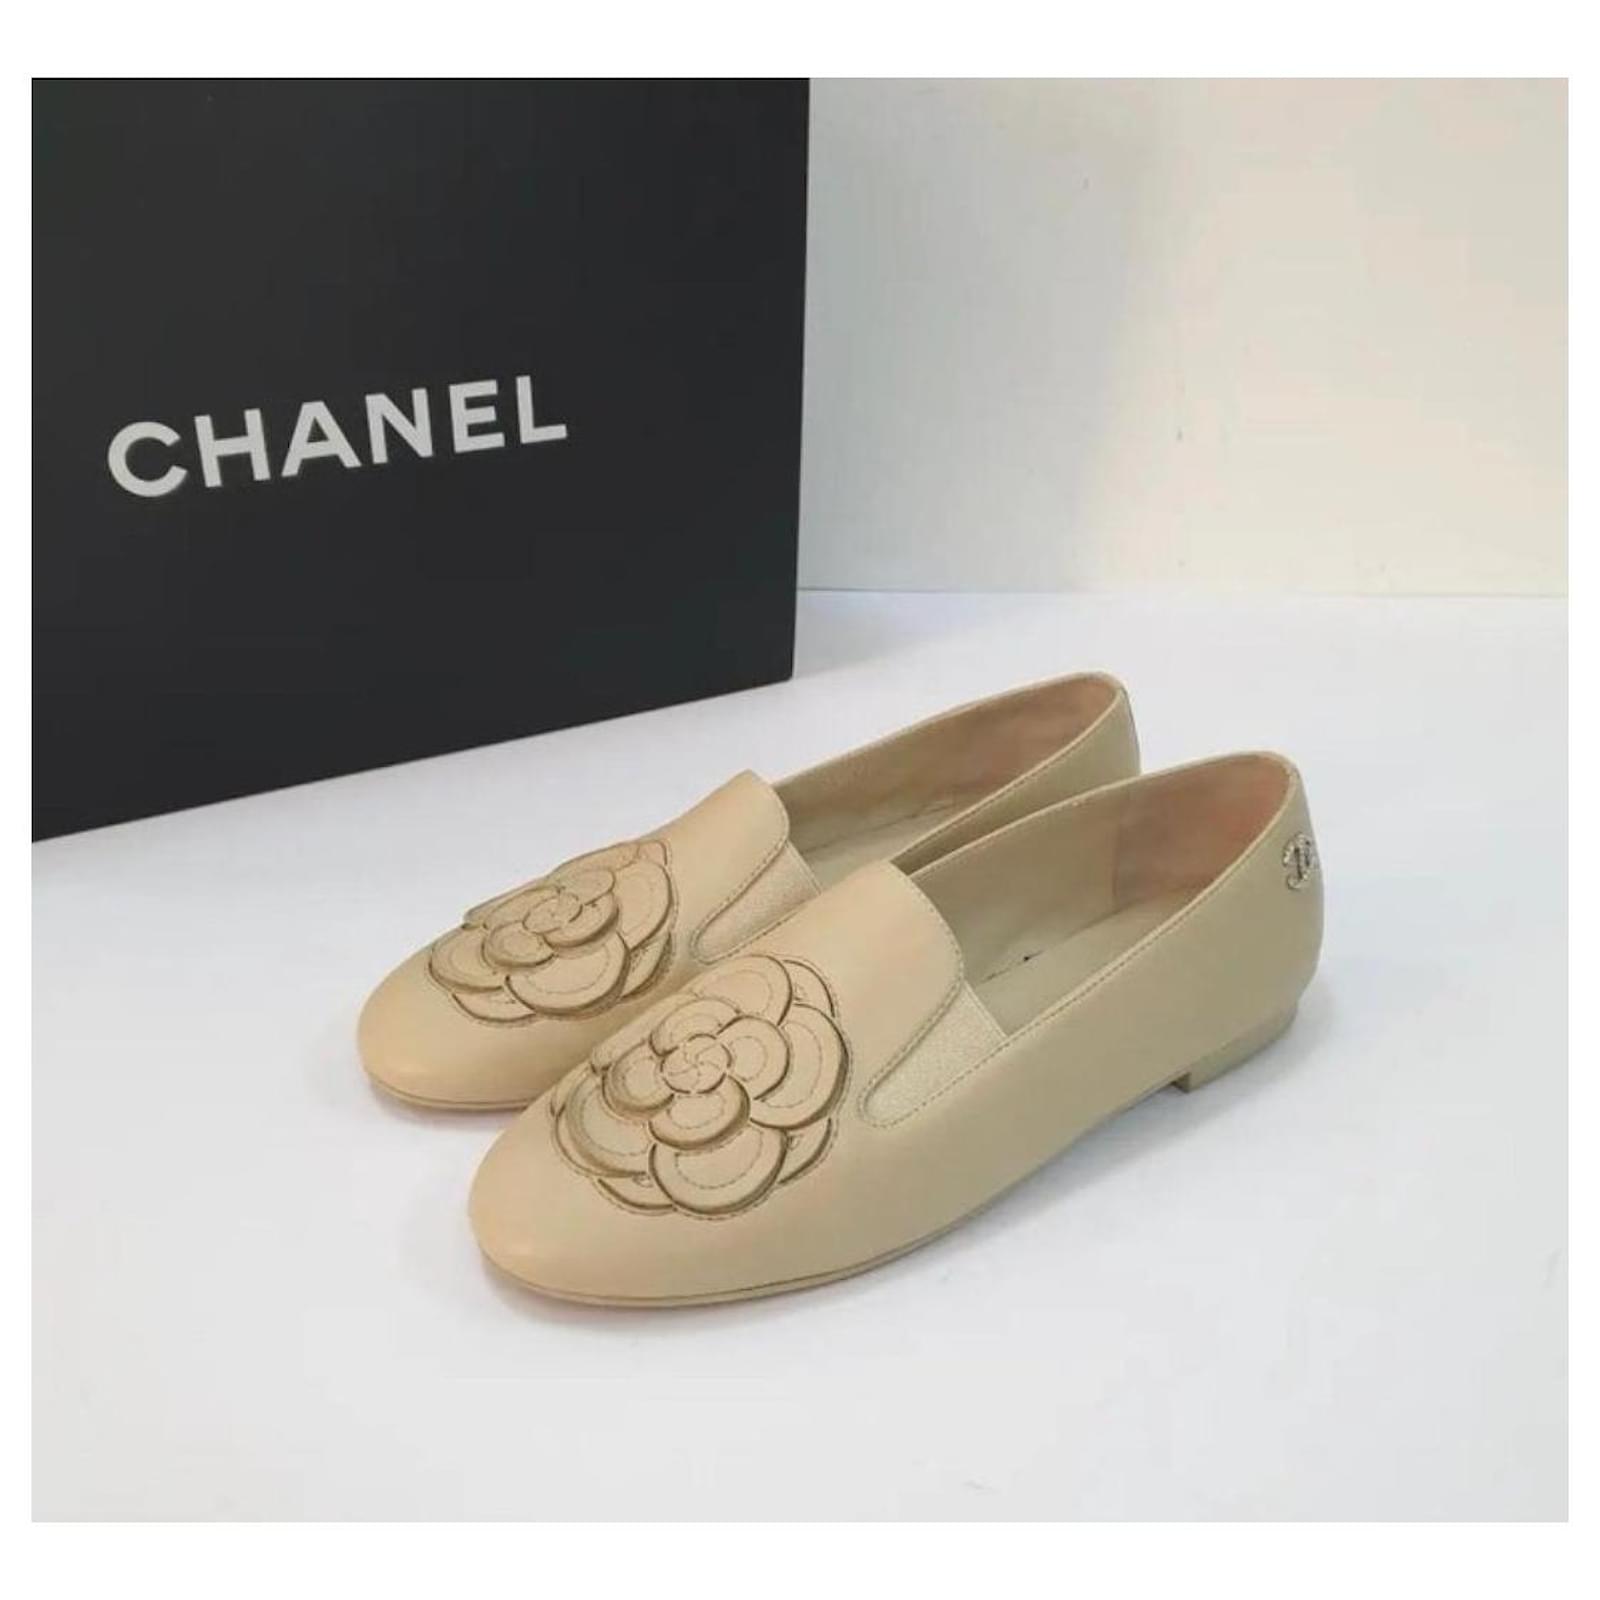 CHANEL, Shoes, Chanellambskin Quilted Cc Turnlock Loafers 395 Beige